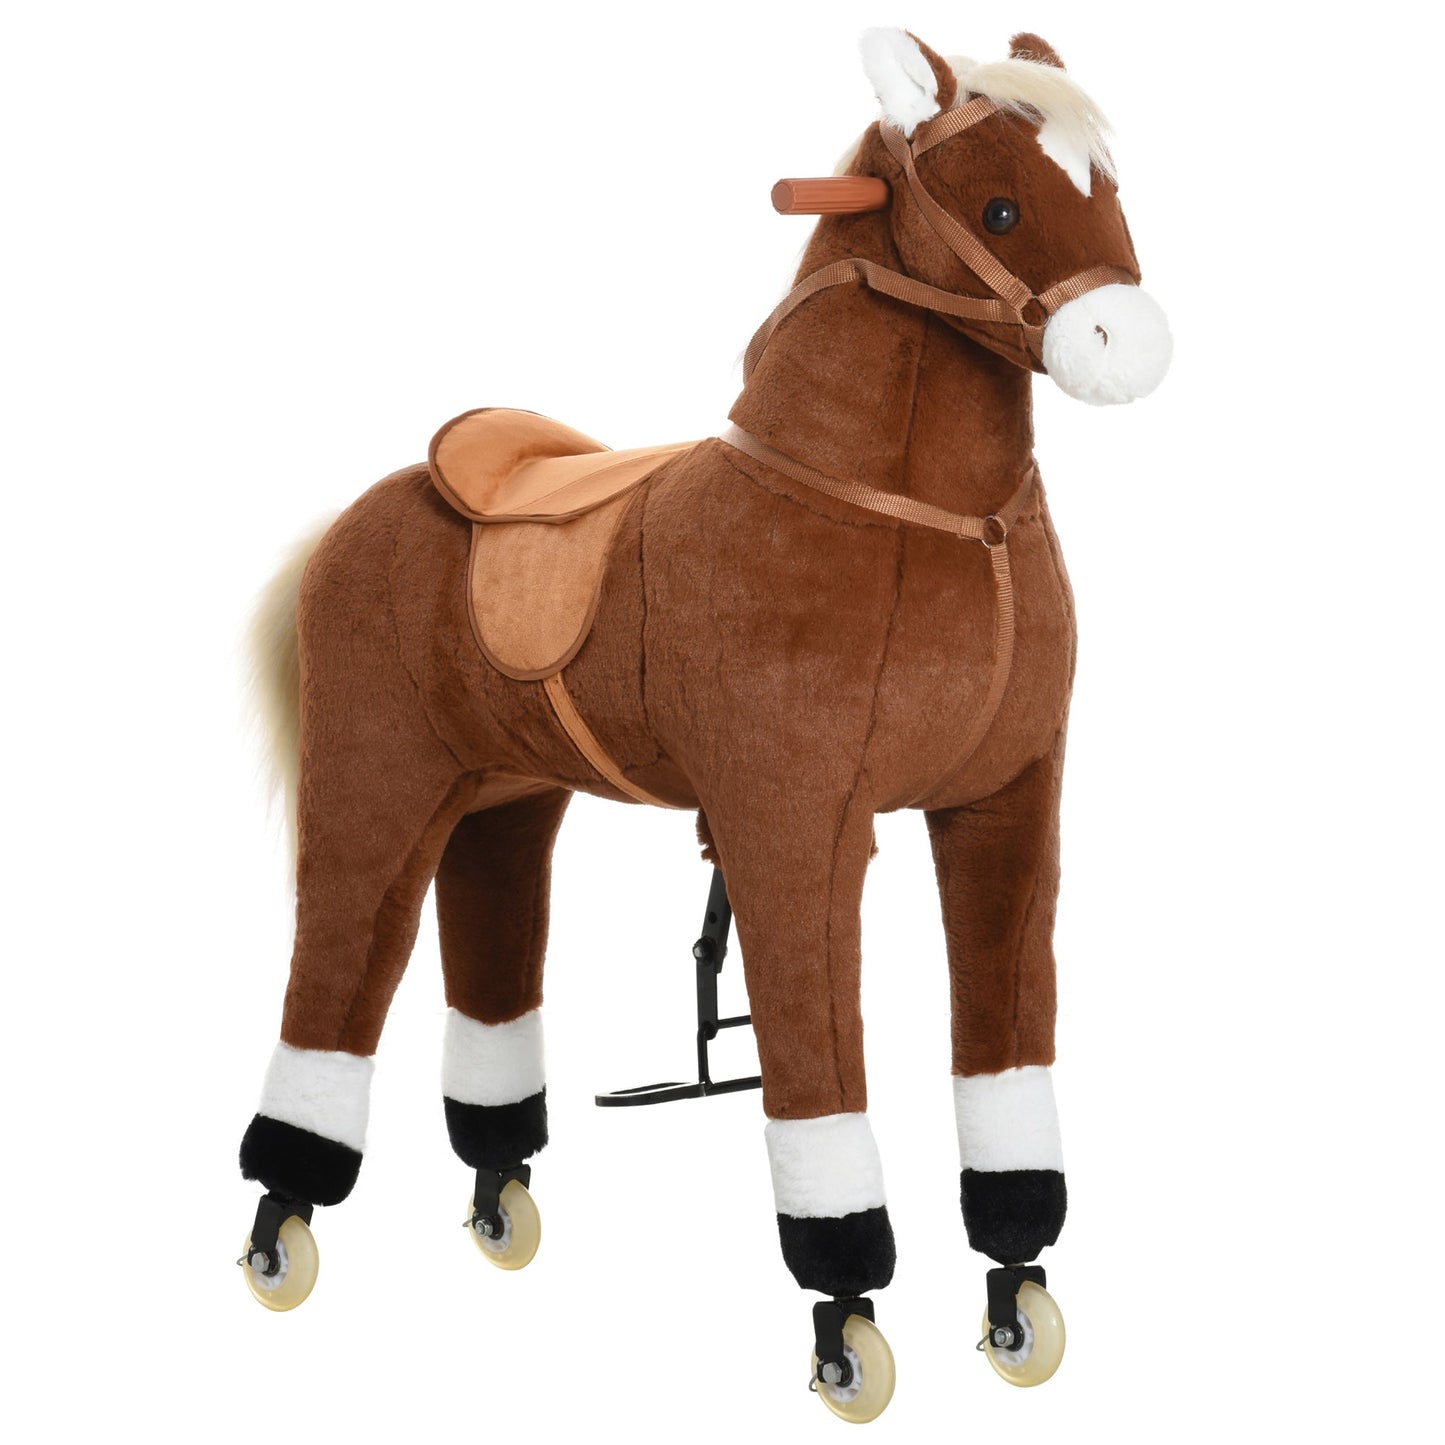 Kids Rocking Horse Walking Horse with Wheels, Large Size Moving Hobby Horse Ride on Toy Gift for Children 5-16 Years at Gallery Canada